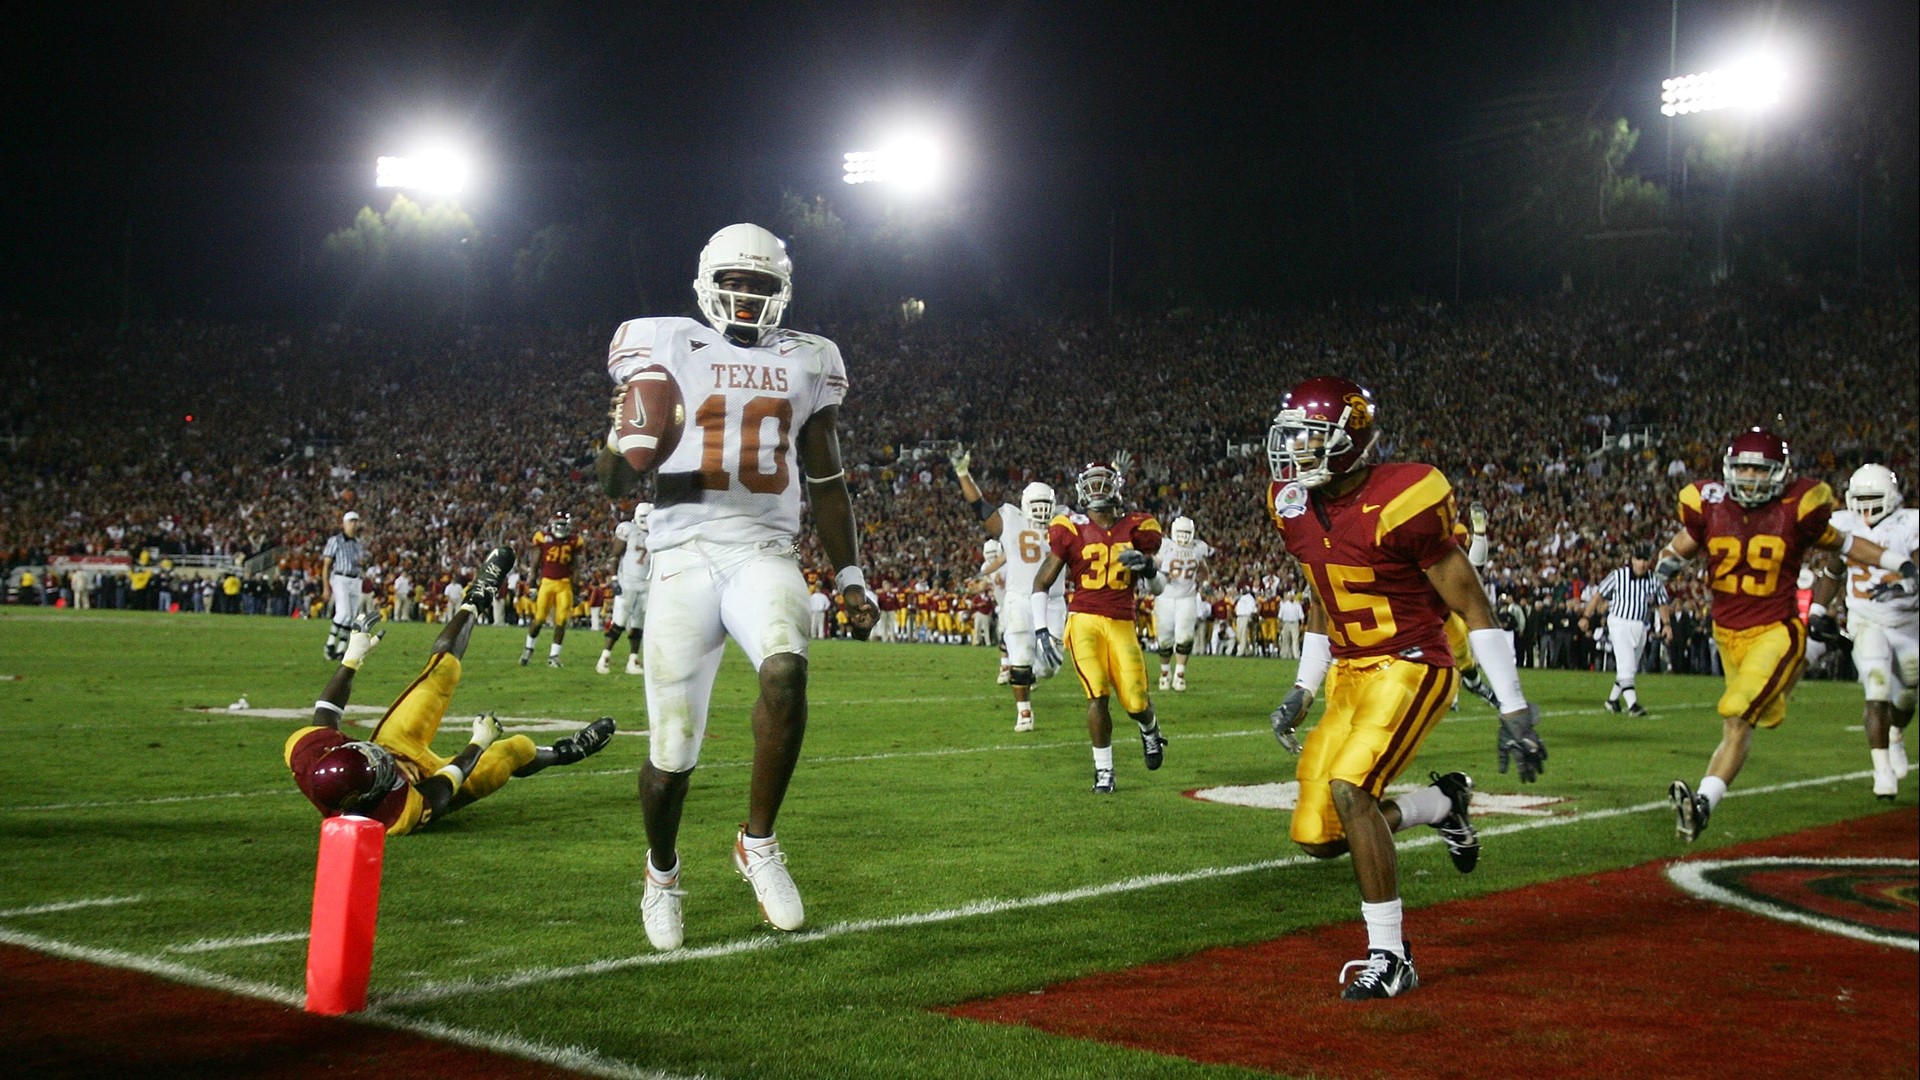 Legendary Ut Quarterback Vince Young To Host Meet And Greet At Crunch Fitness In Tyler Cbs19tv 1466